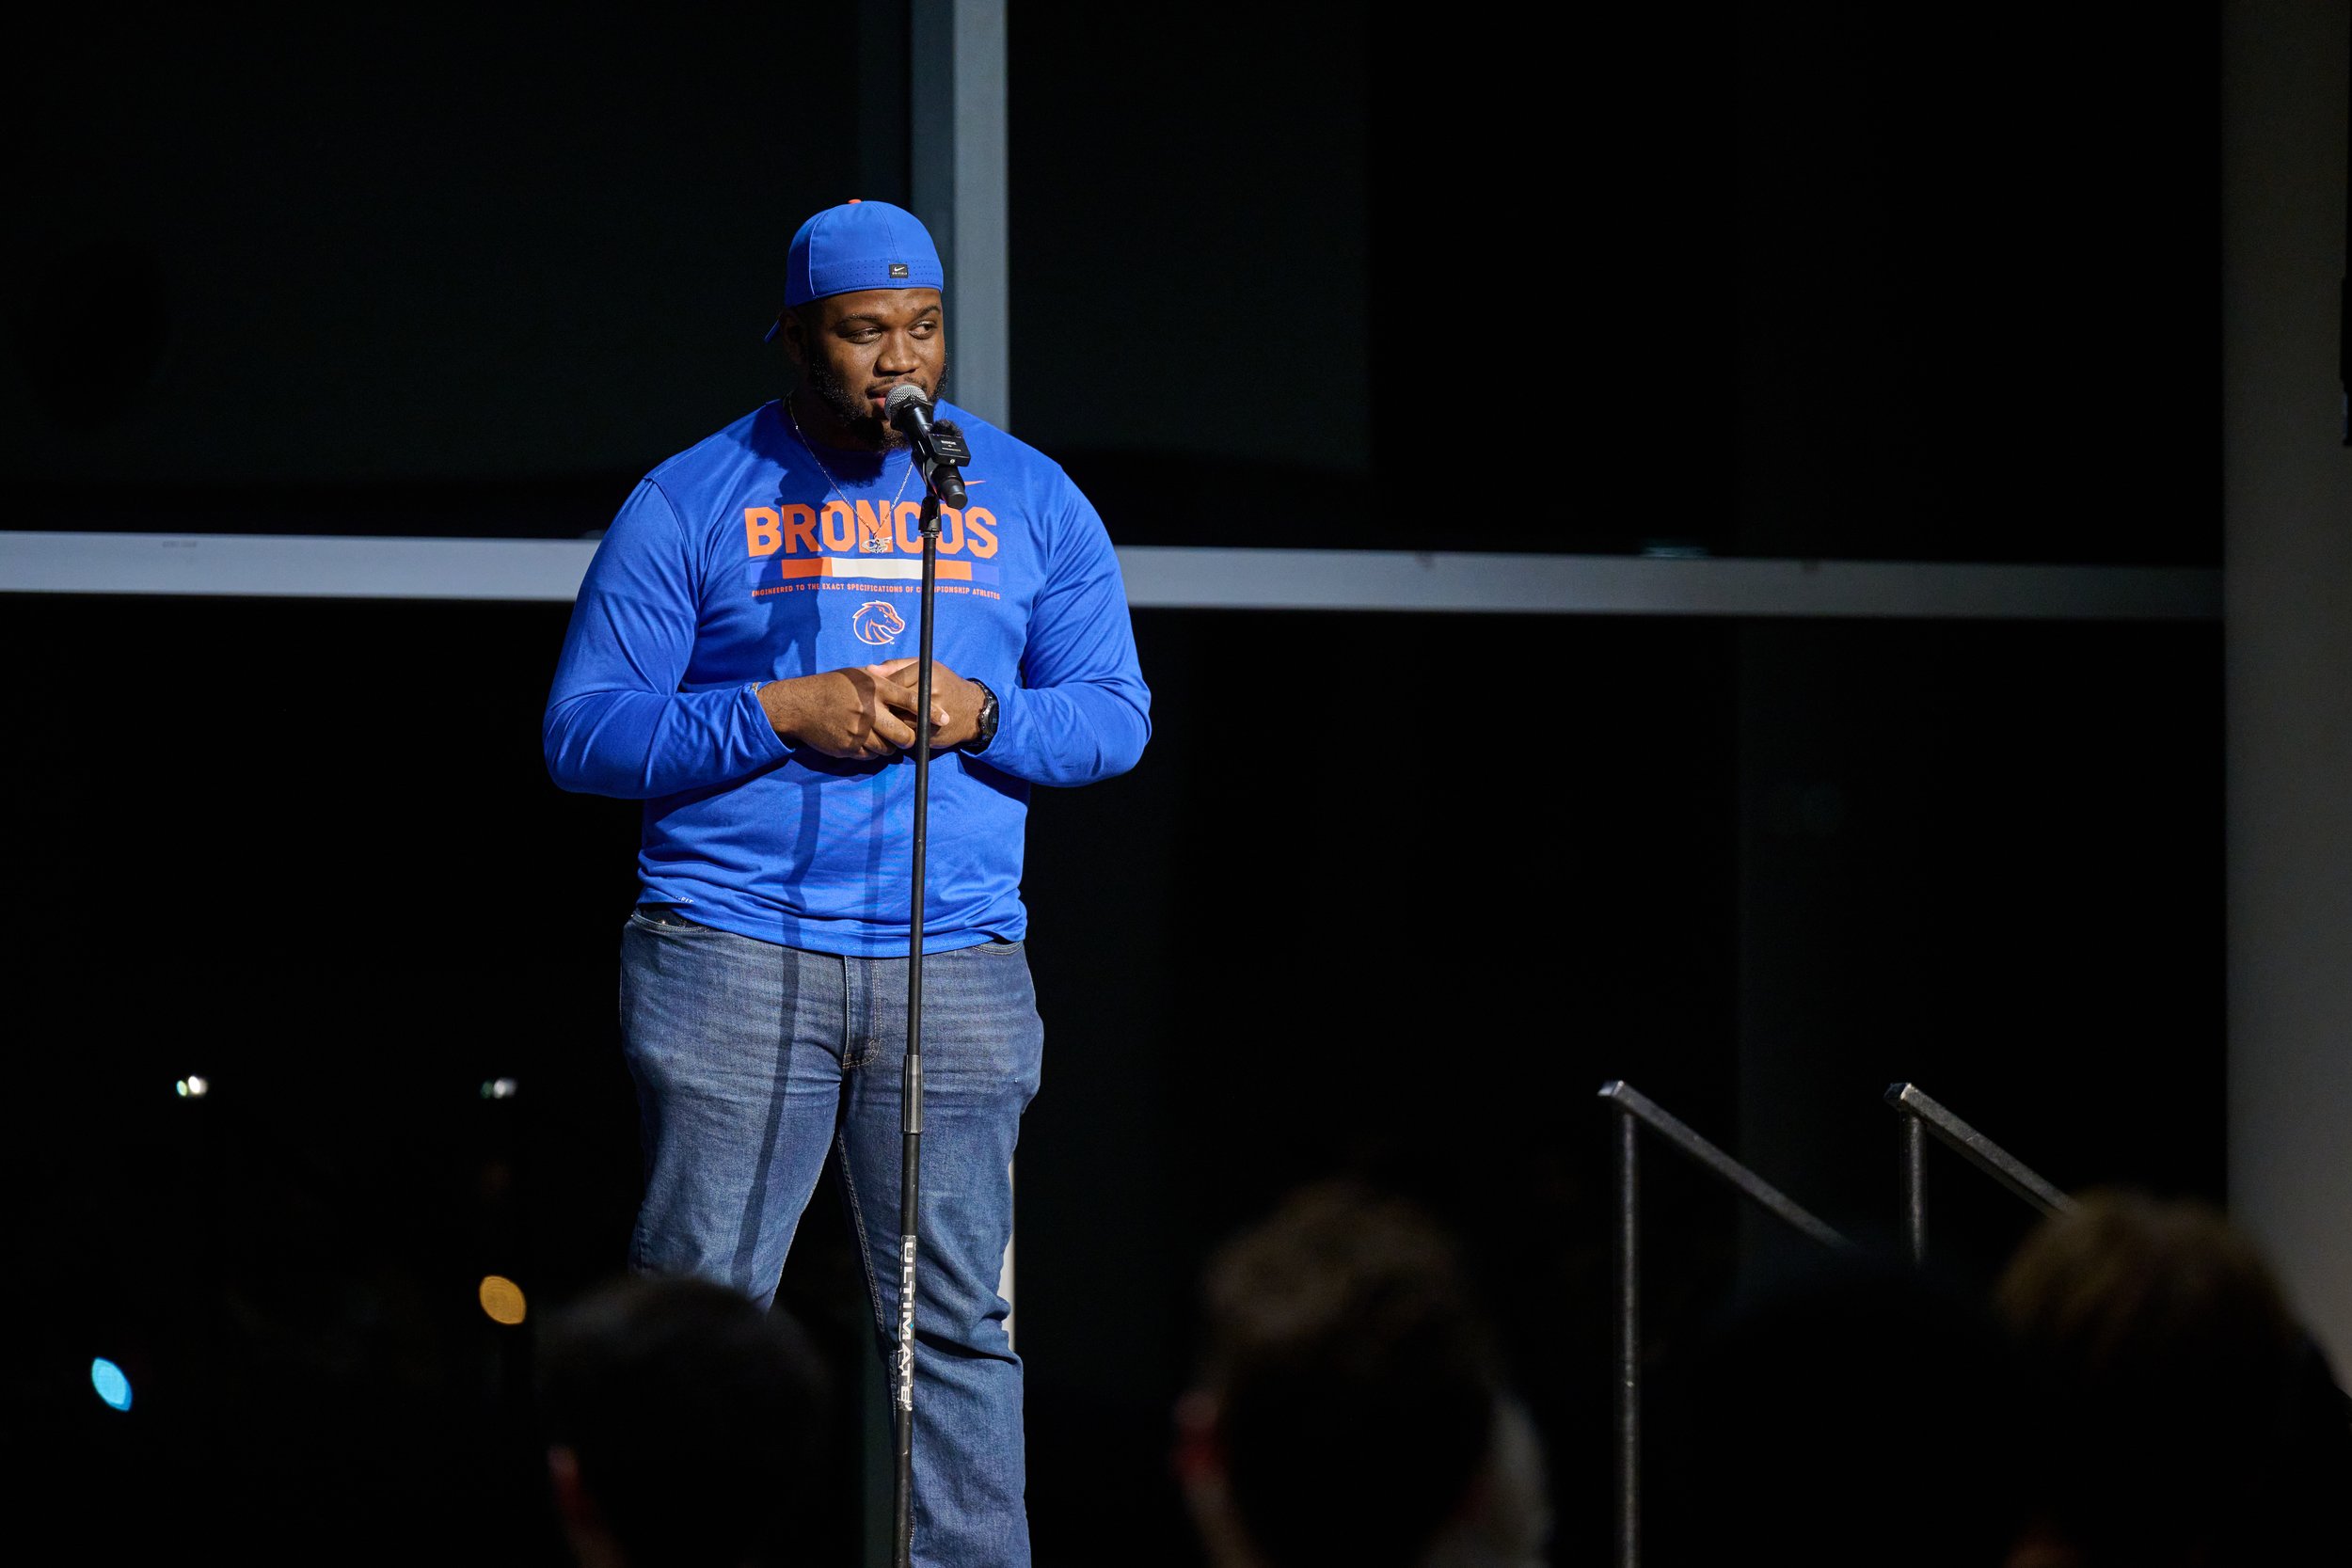 Image of student speaker from previous Story Collider event at Boise State.